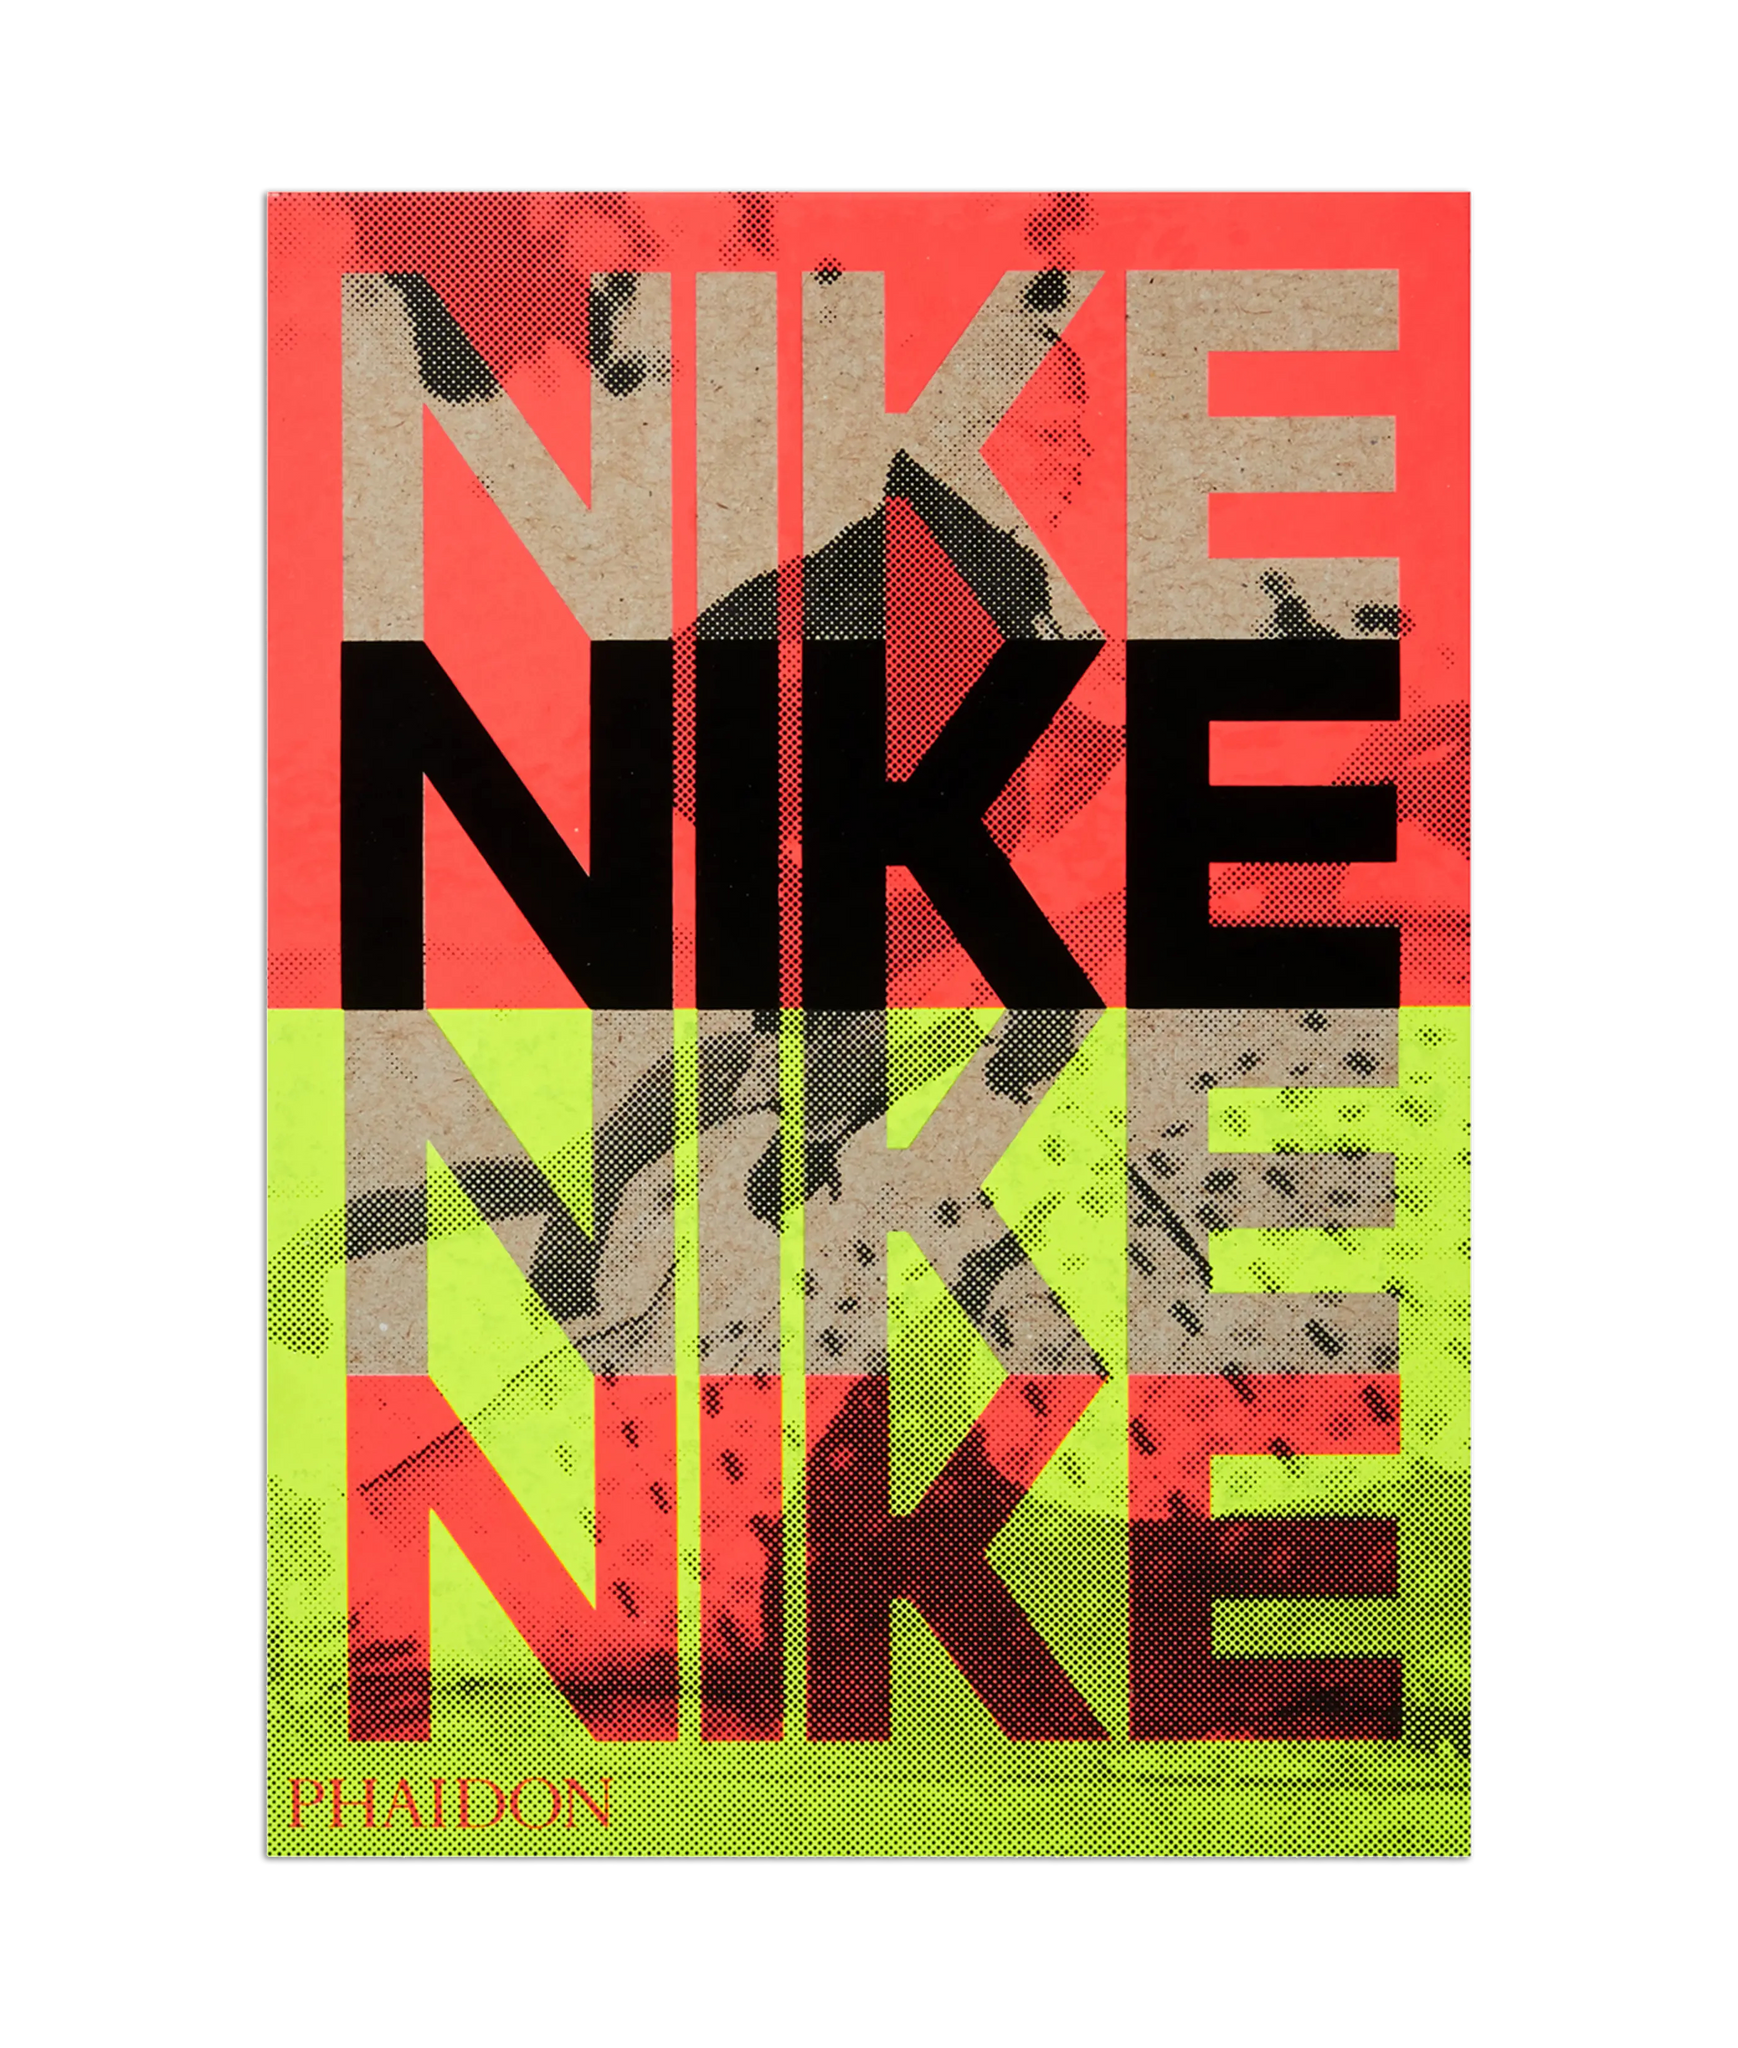 "Nike: Better is Temporary" by Sam Grawe